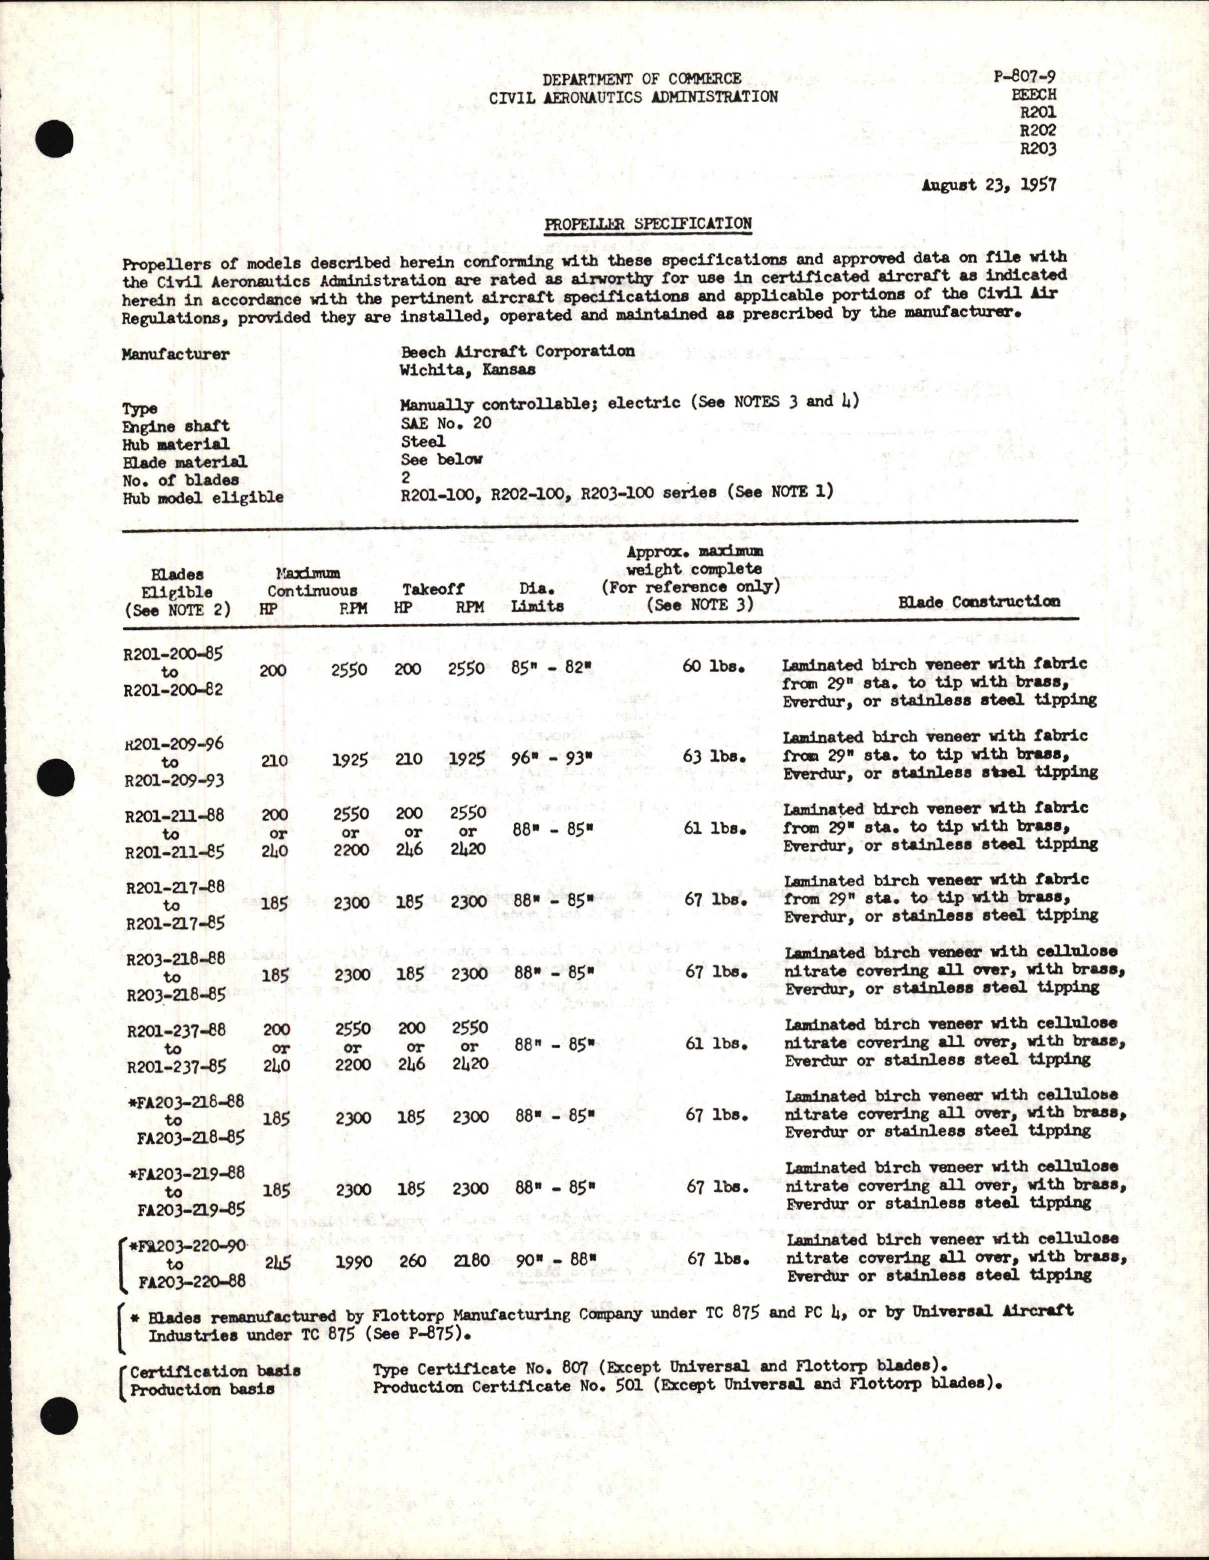 Sample page 1 from AirCorps Library document: R201, 202, and 203